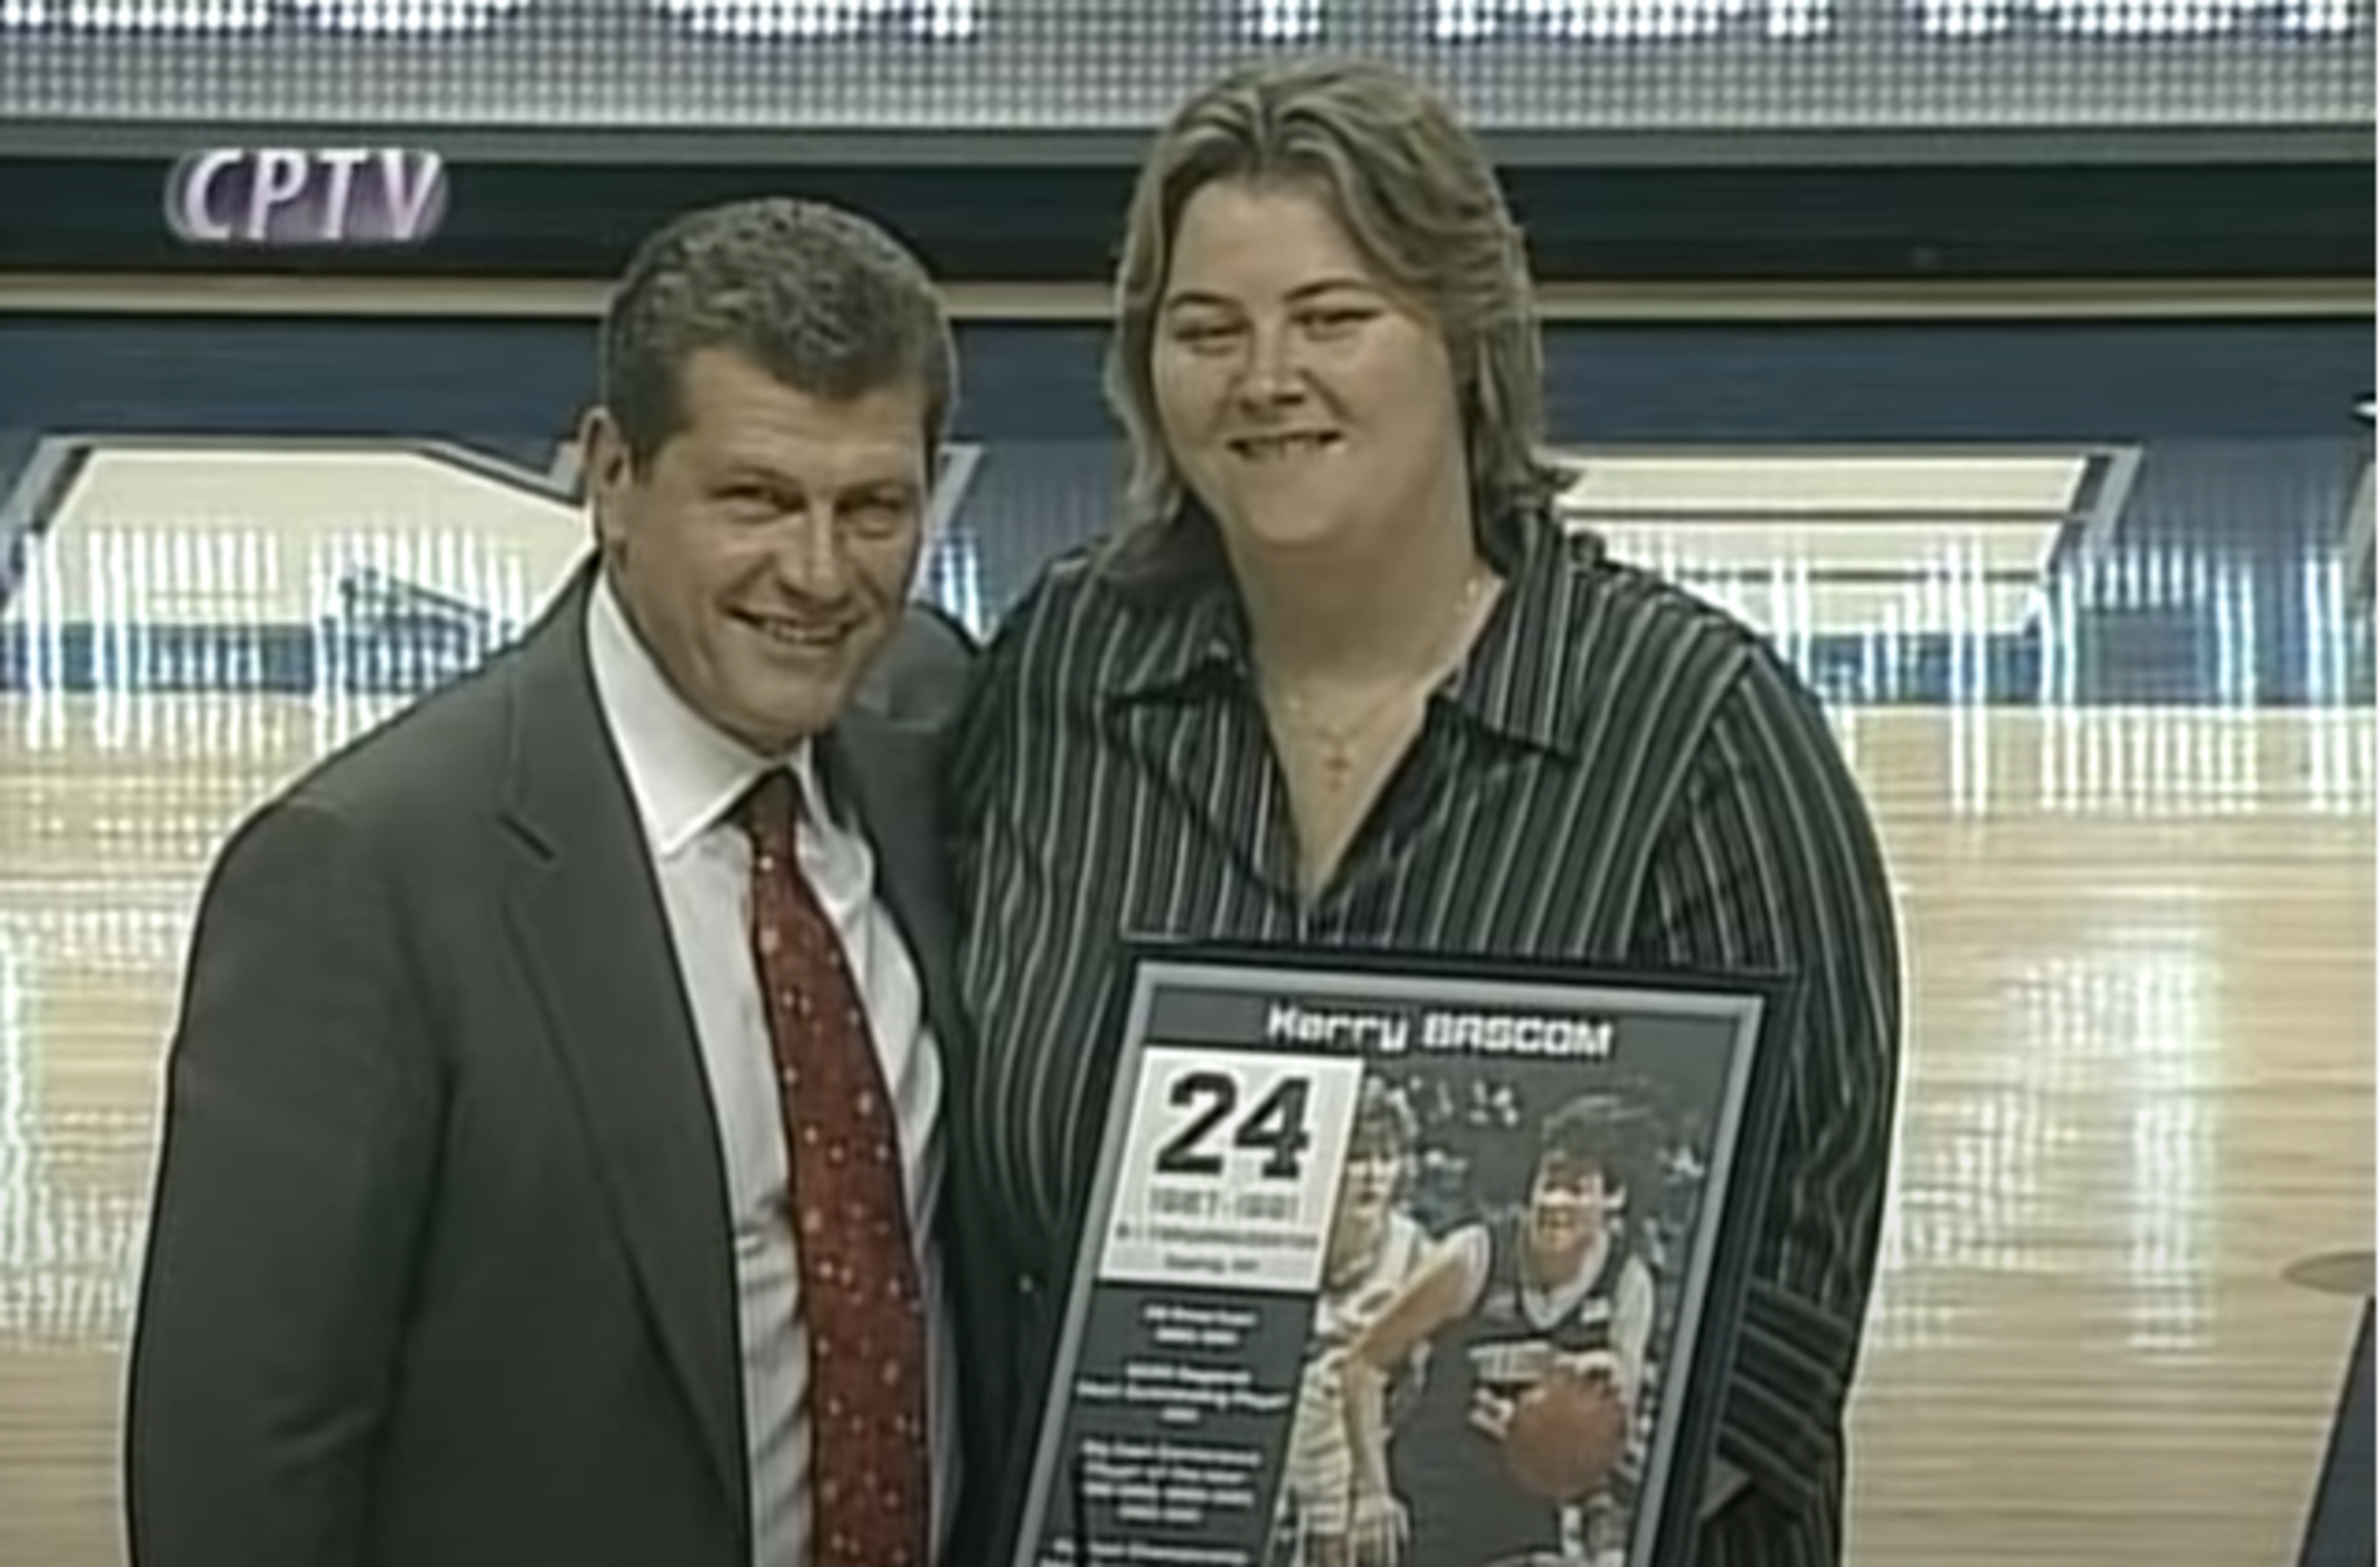 The best players in UConn women's basketball history